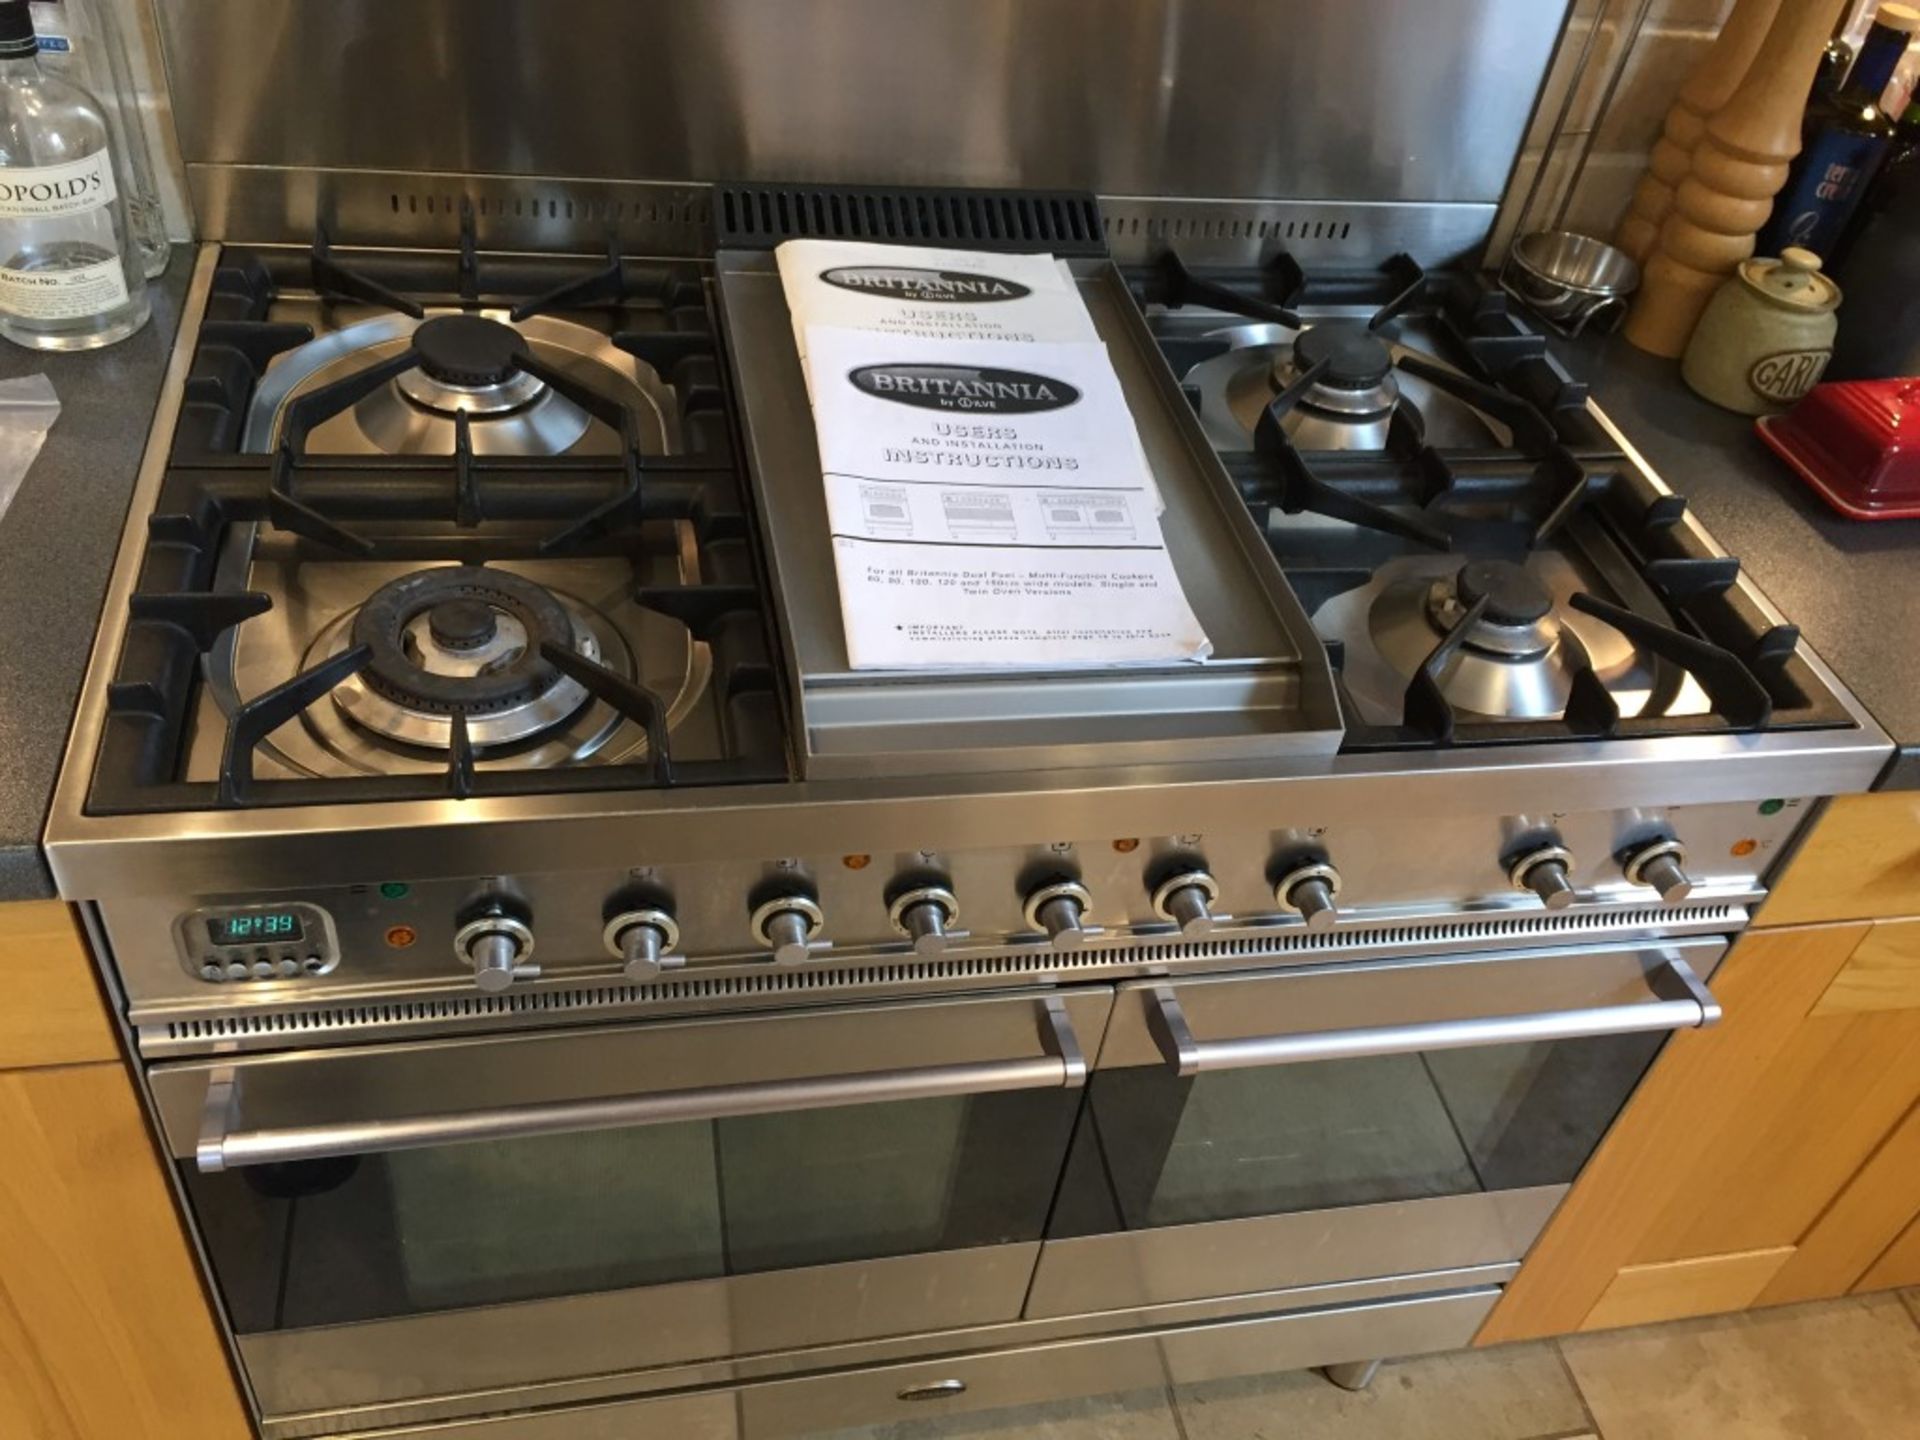 1 x Britannia Classic Range Cooker With Britannia Extractor Hood - Excellent Working Condition - Image 3 of 11